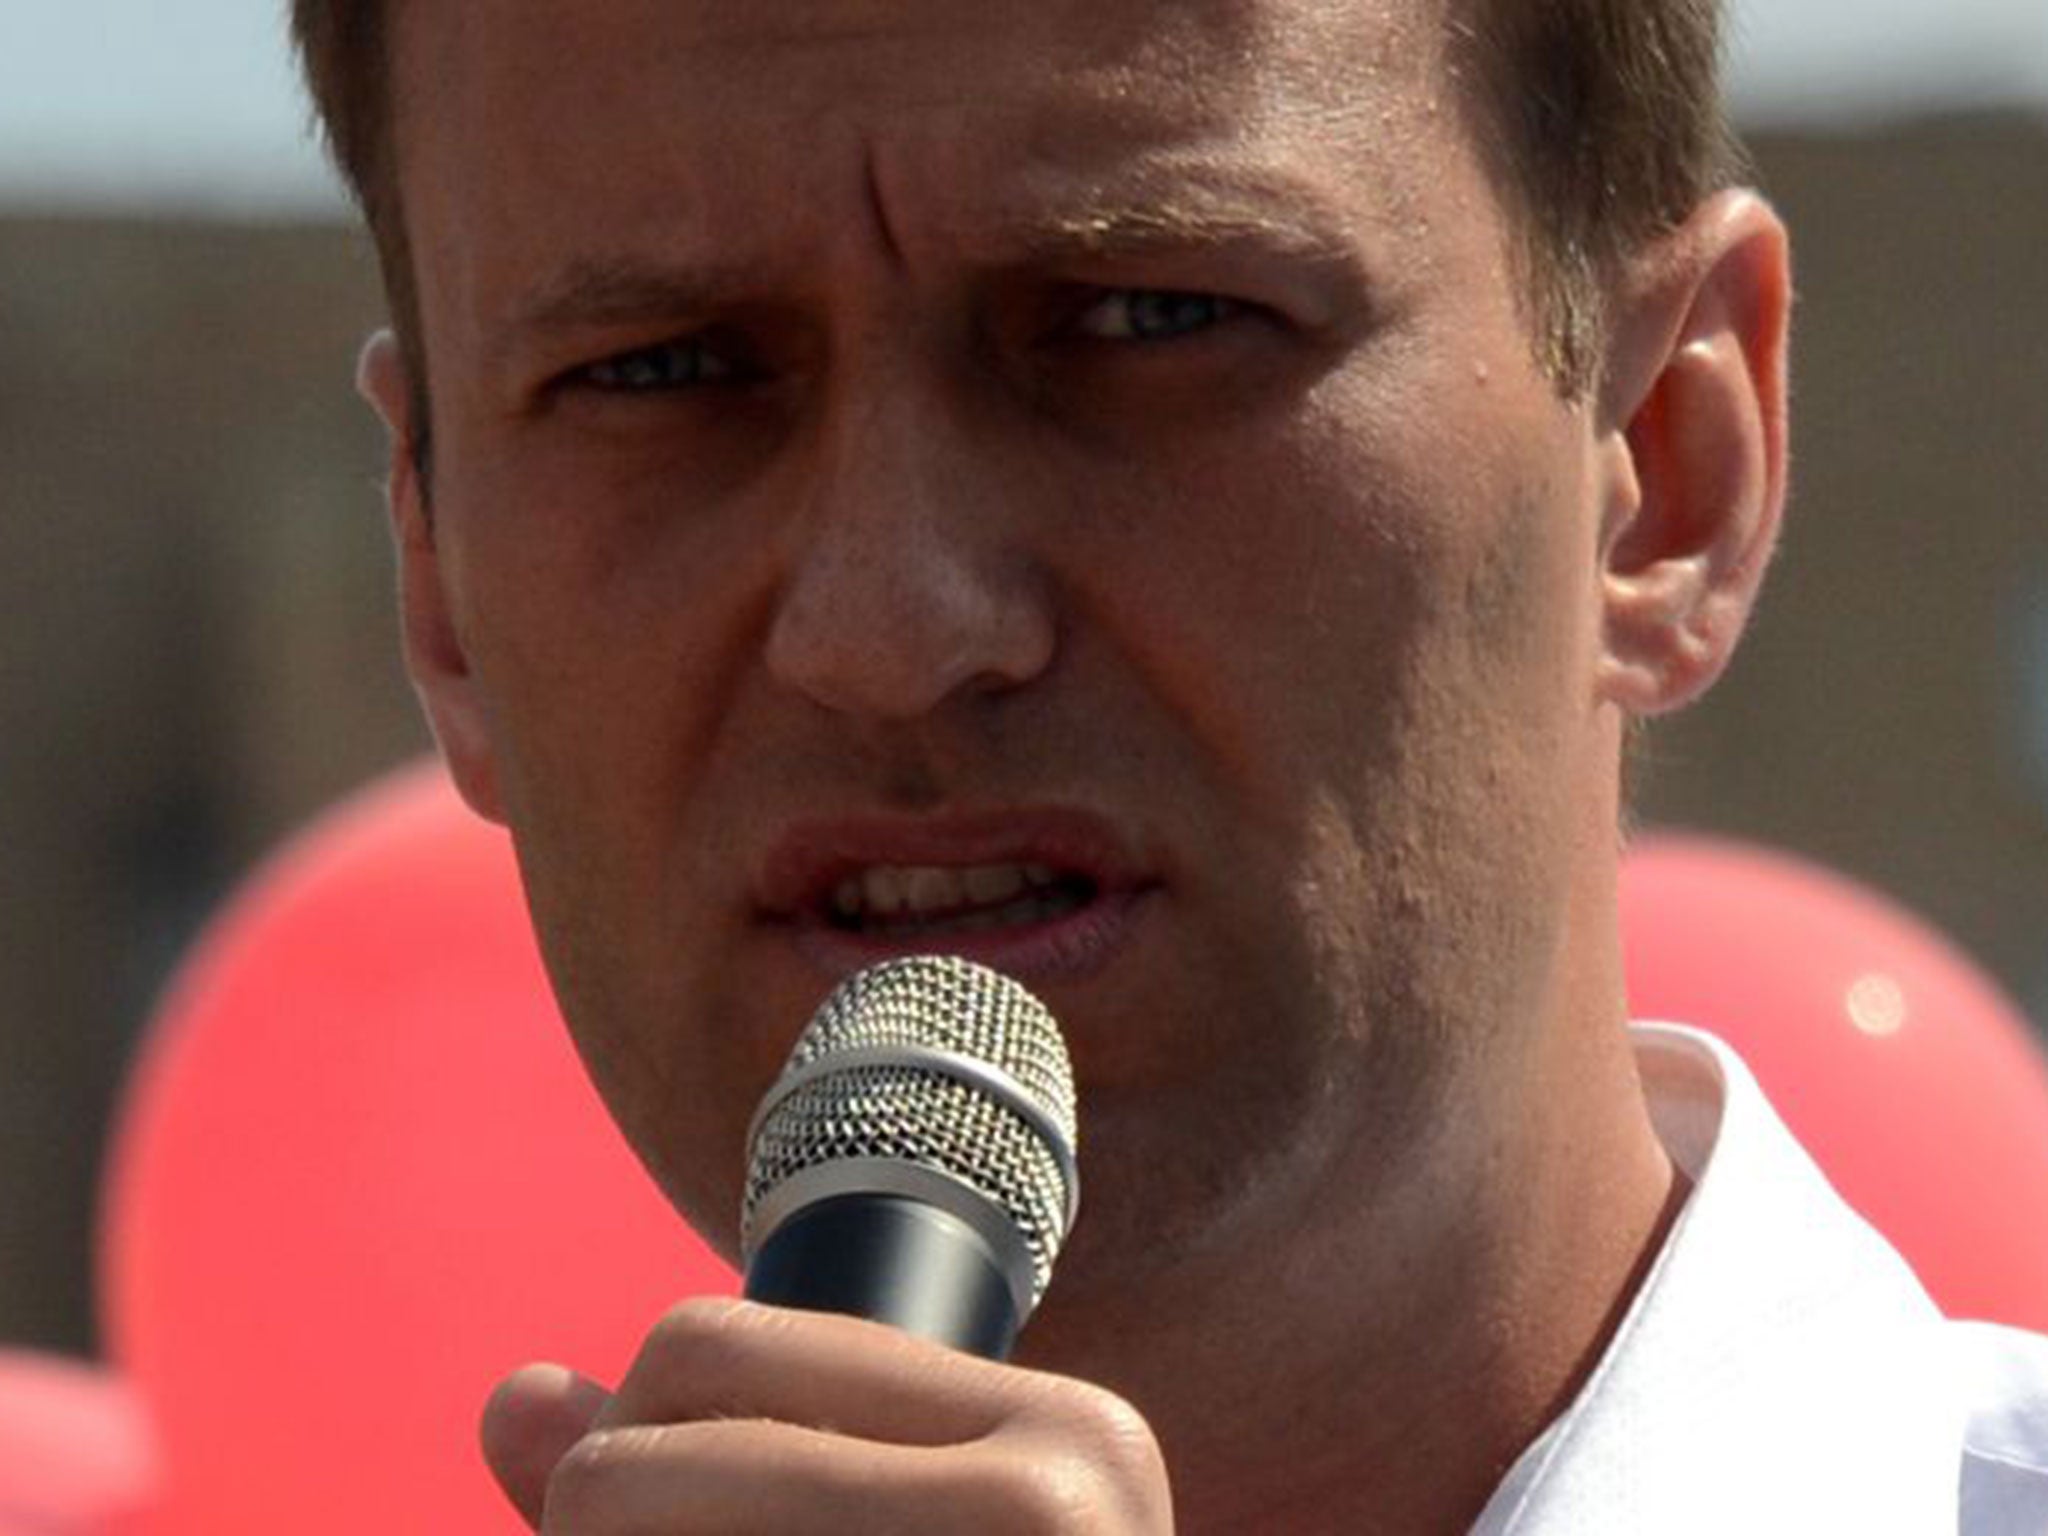 Vladimir Ashurkov is alleged to have embezzled 2.27 million roubles (£42,000) from Alexei Navalny’s campaign in the 2013 election for Moscow’s mayor